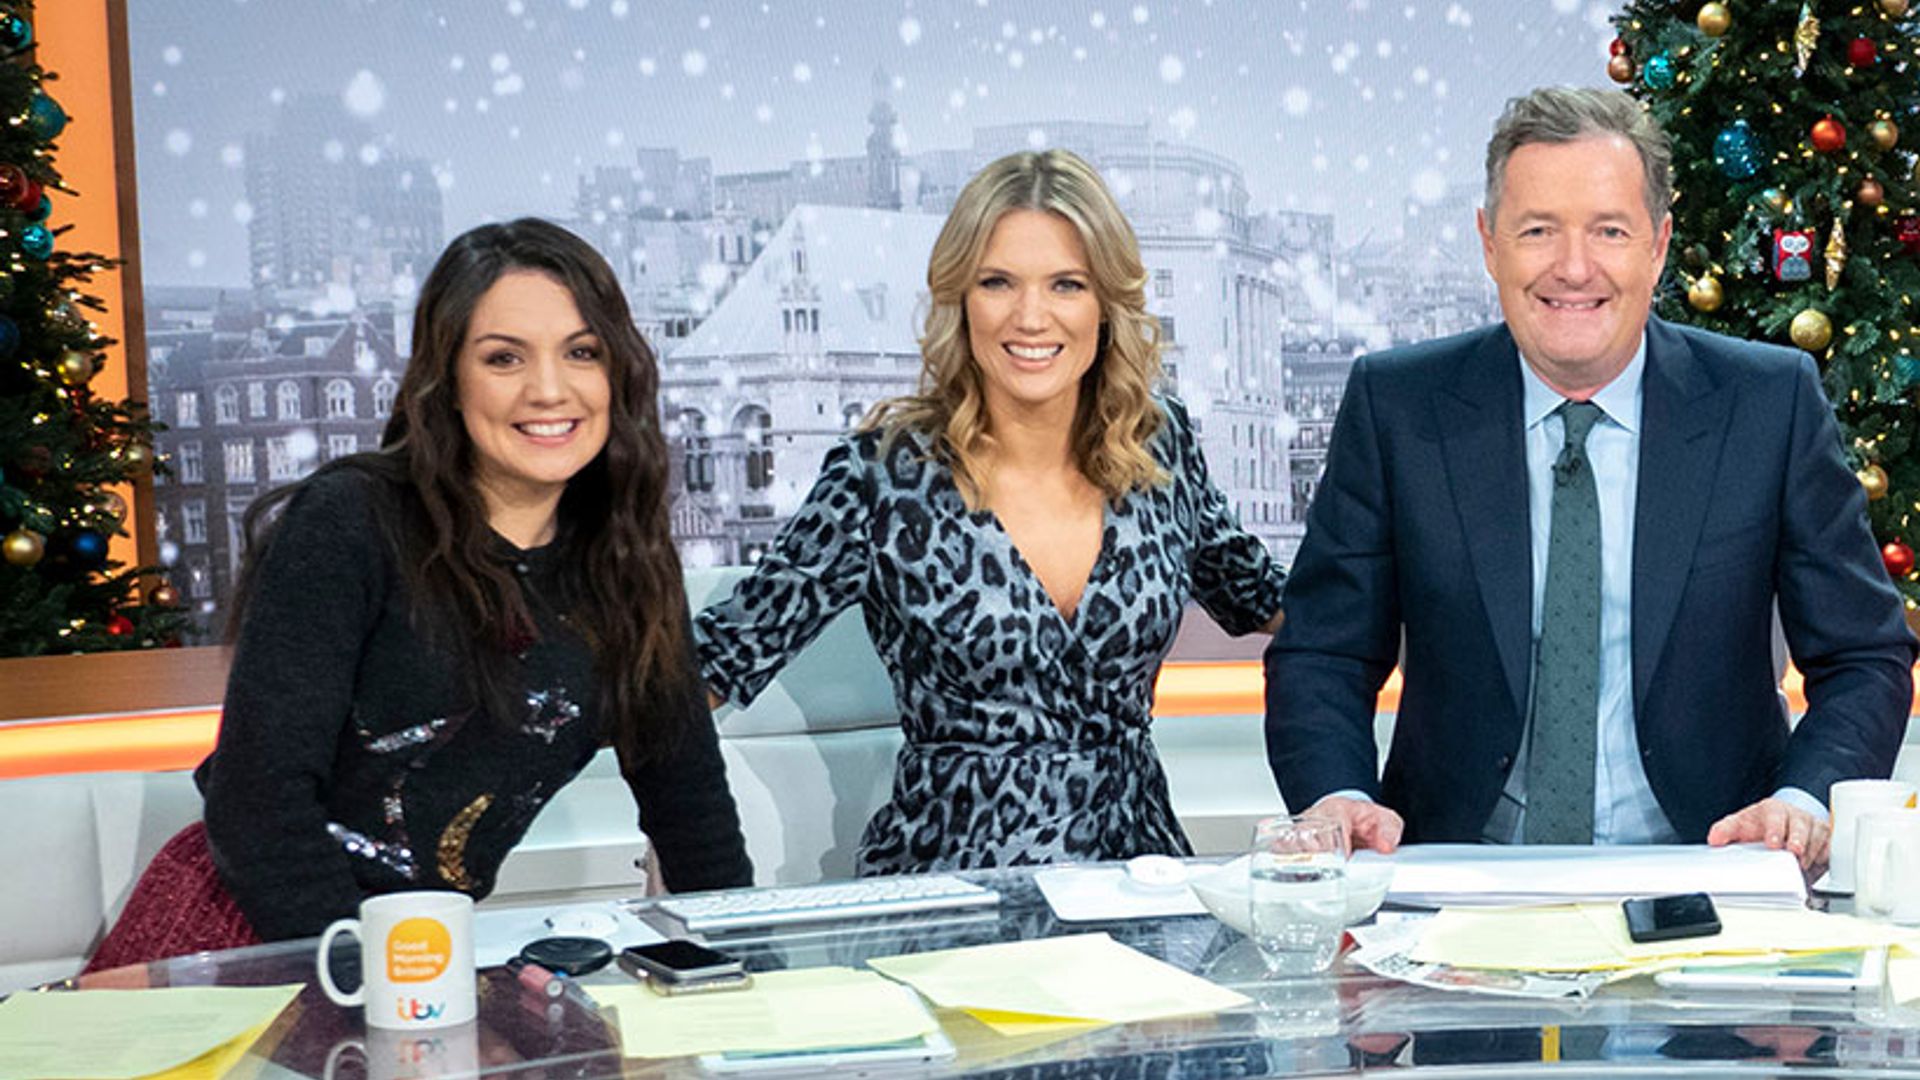 This Marks & Spencer sequin jumper is a big hit on Good Morning Britain